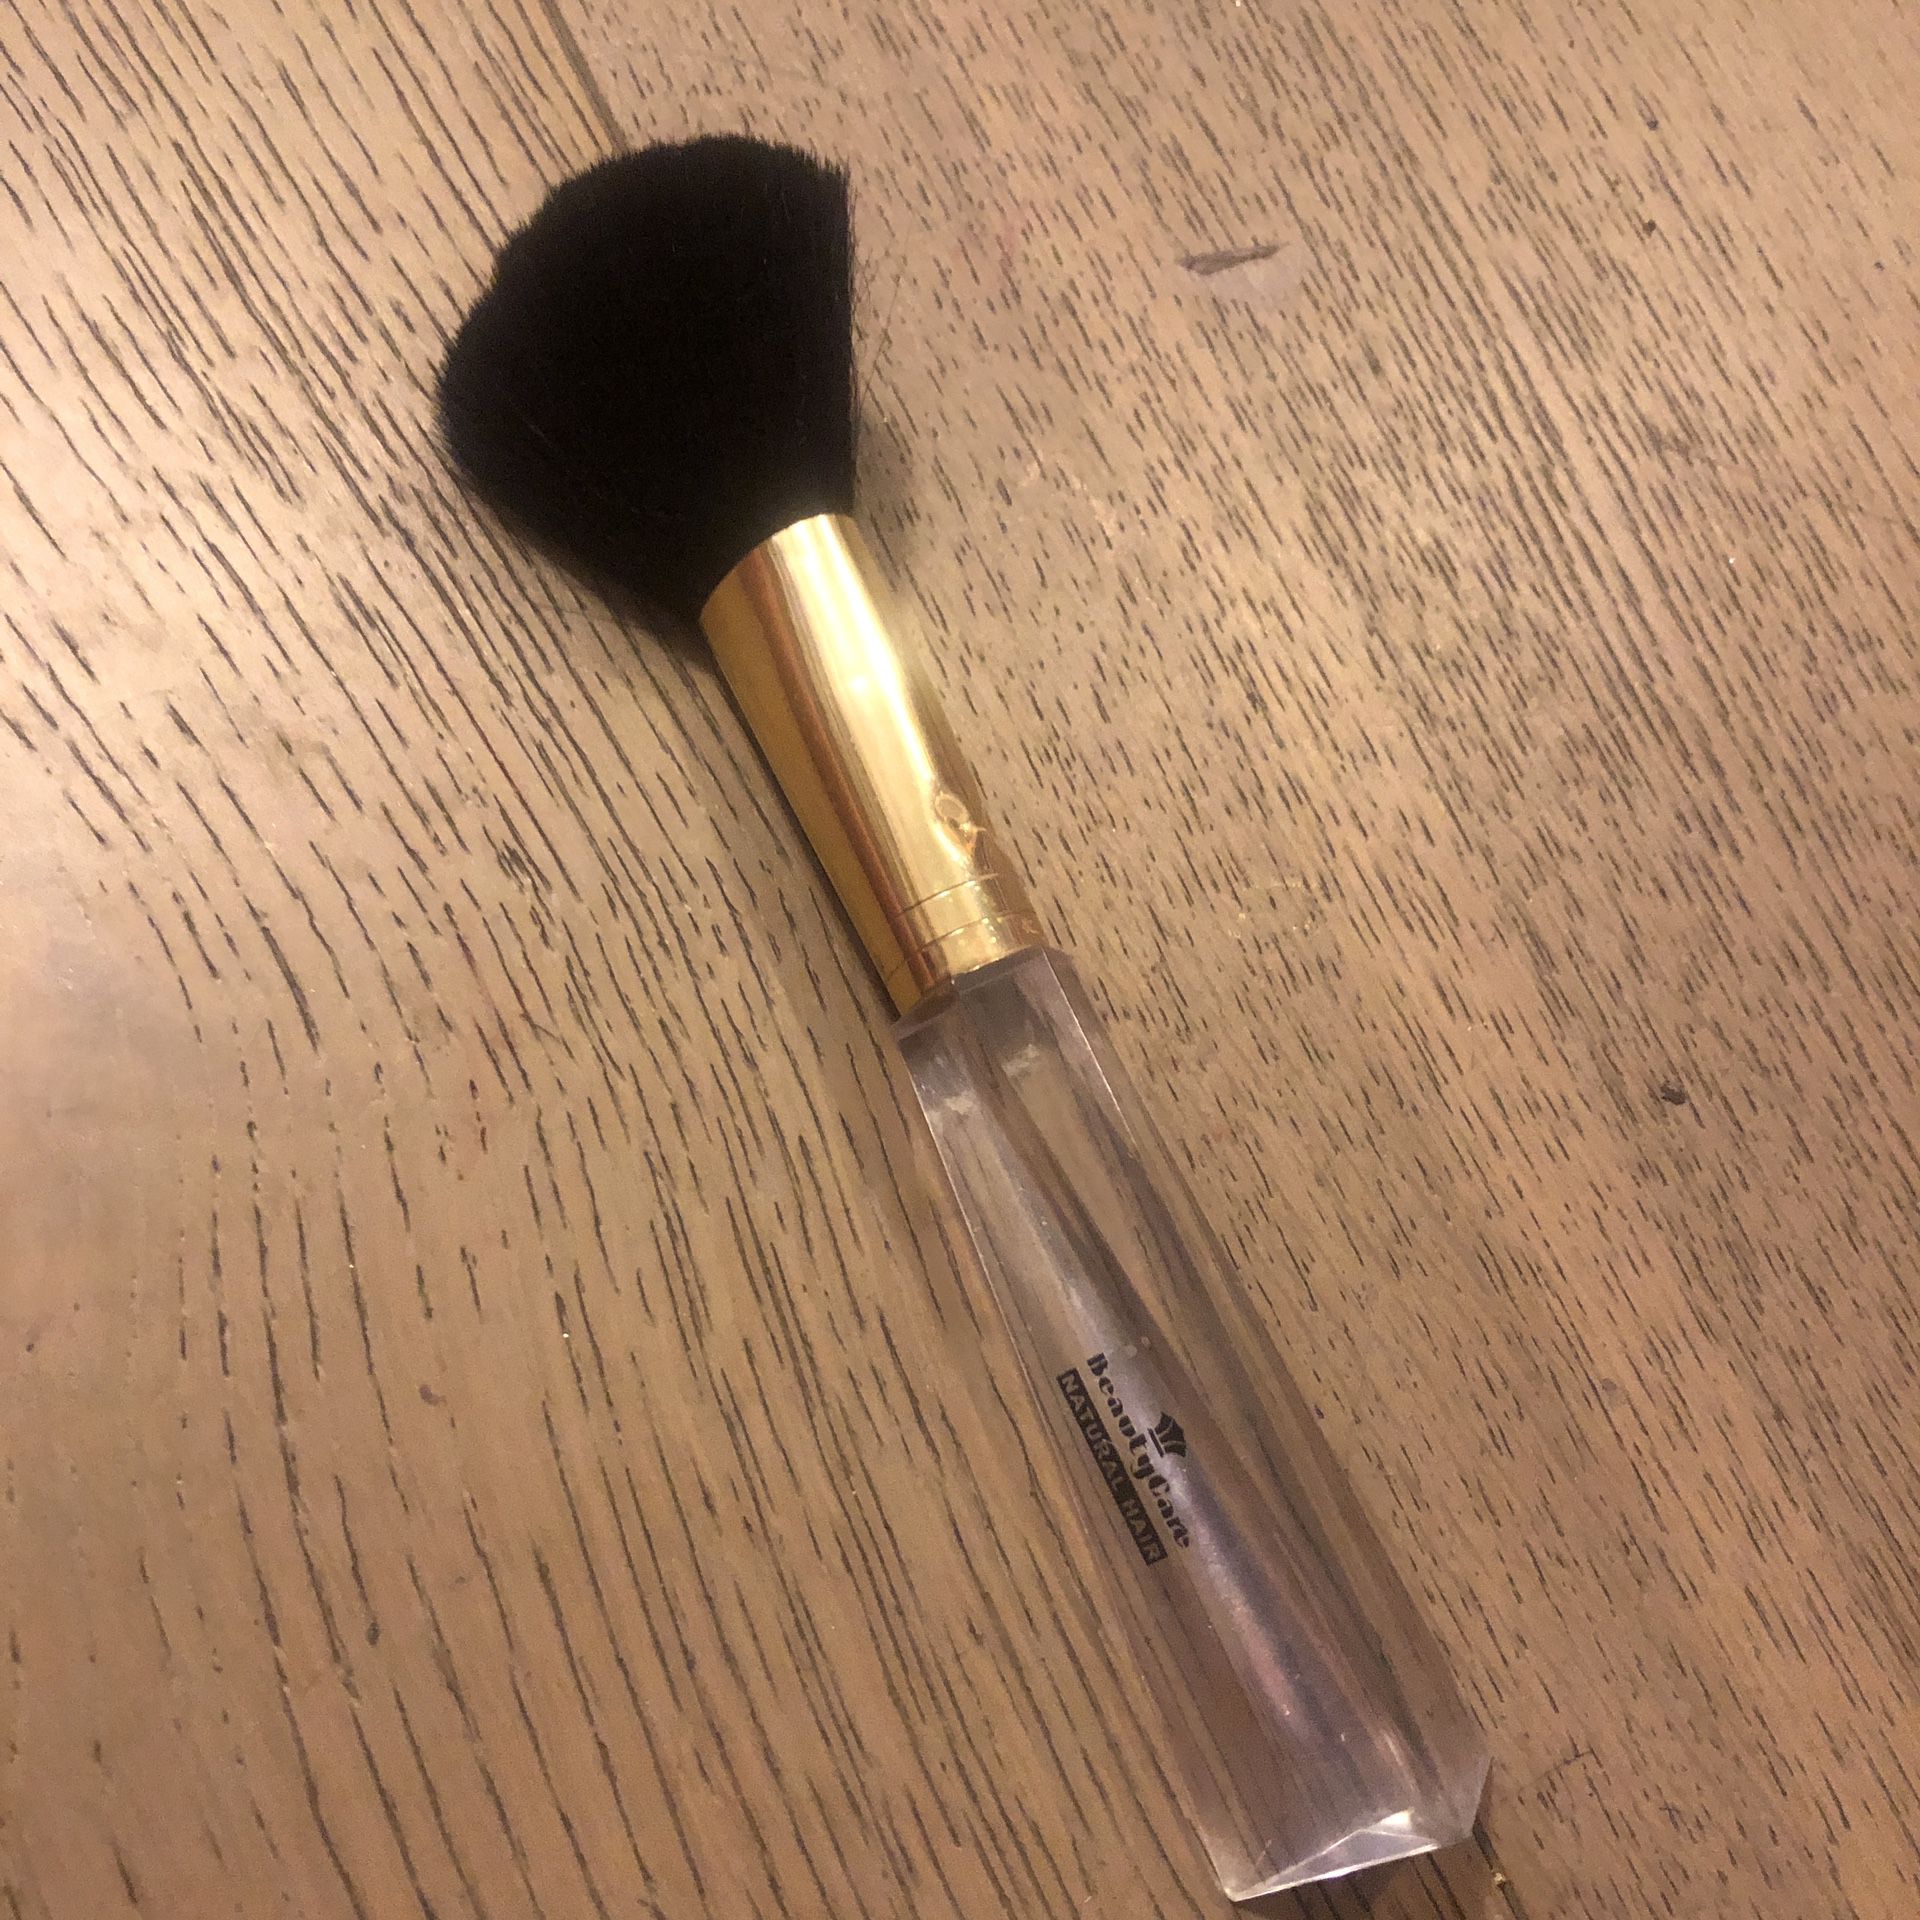 Makeup Brush Cleaner And Brush 